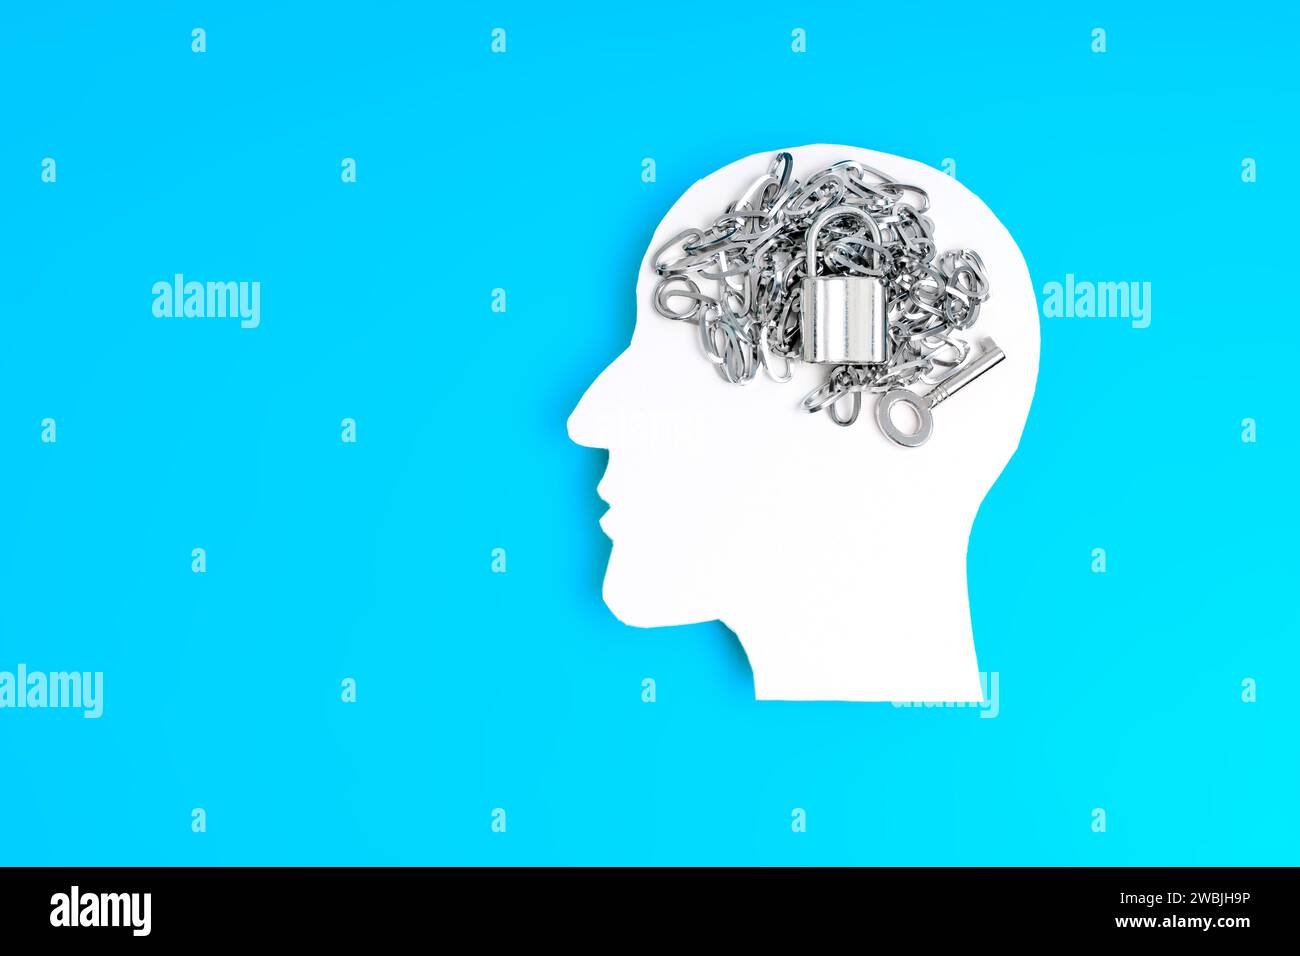 White paper silhouette of a male head in profile isolated on blue with a chain, lock, and key, suggesting the pursuit of unlocking one's potential. Stock Photo